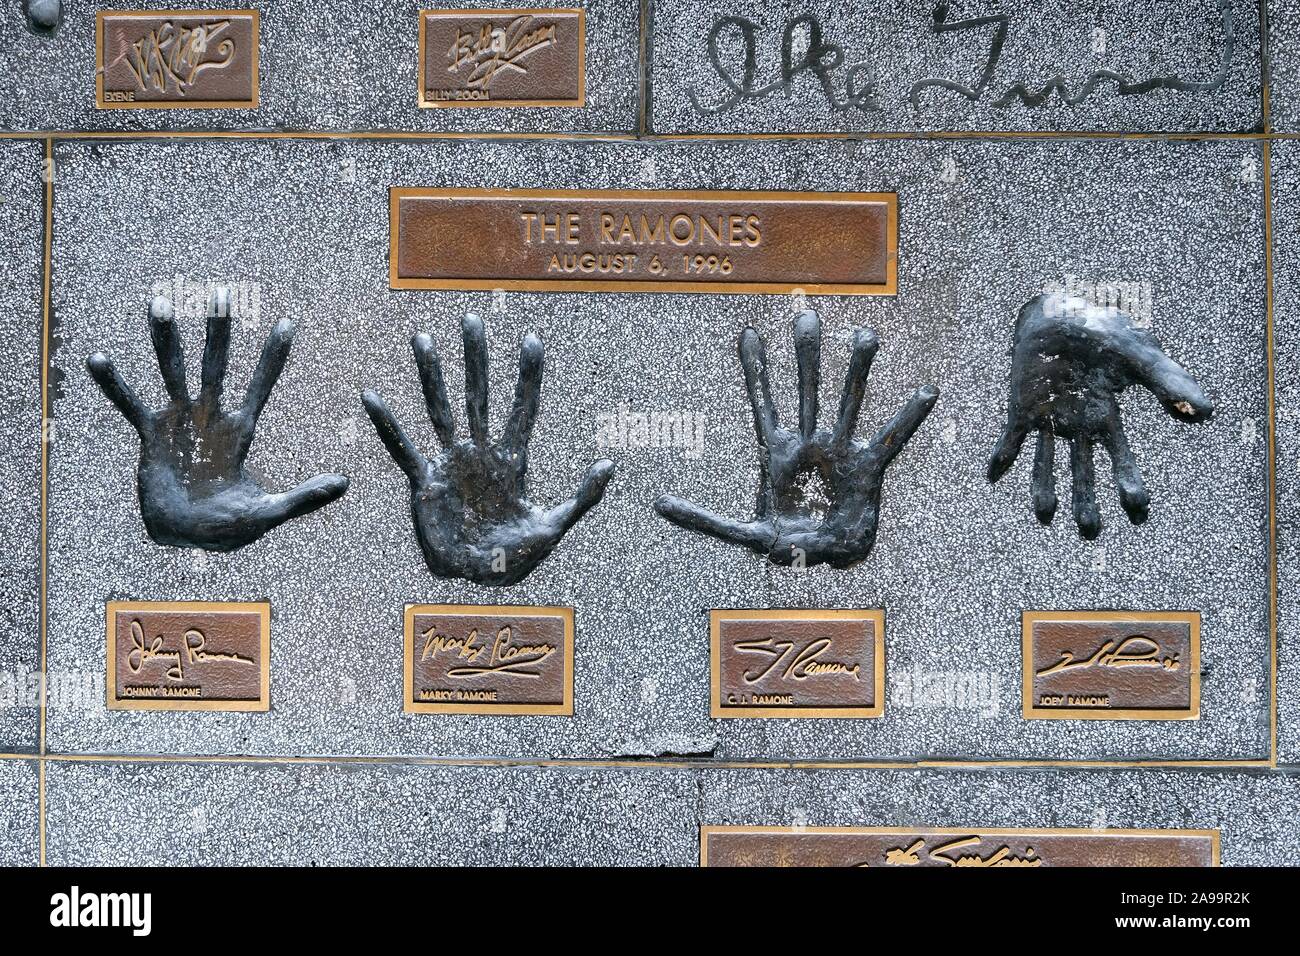 Hands of the band The Ramones with JohnnyMarky, C.J. and Joey Ramone, Rock Walk on Sunset Boulevard, Hollywood, Los Angeles, California, USA Stock Photo